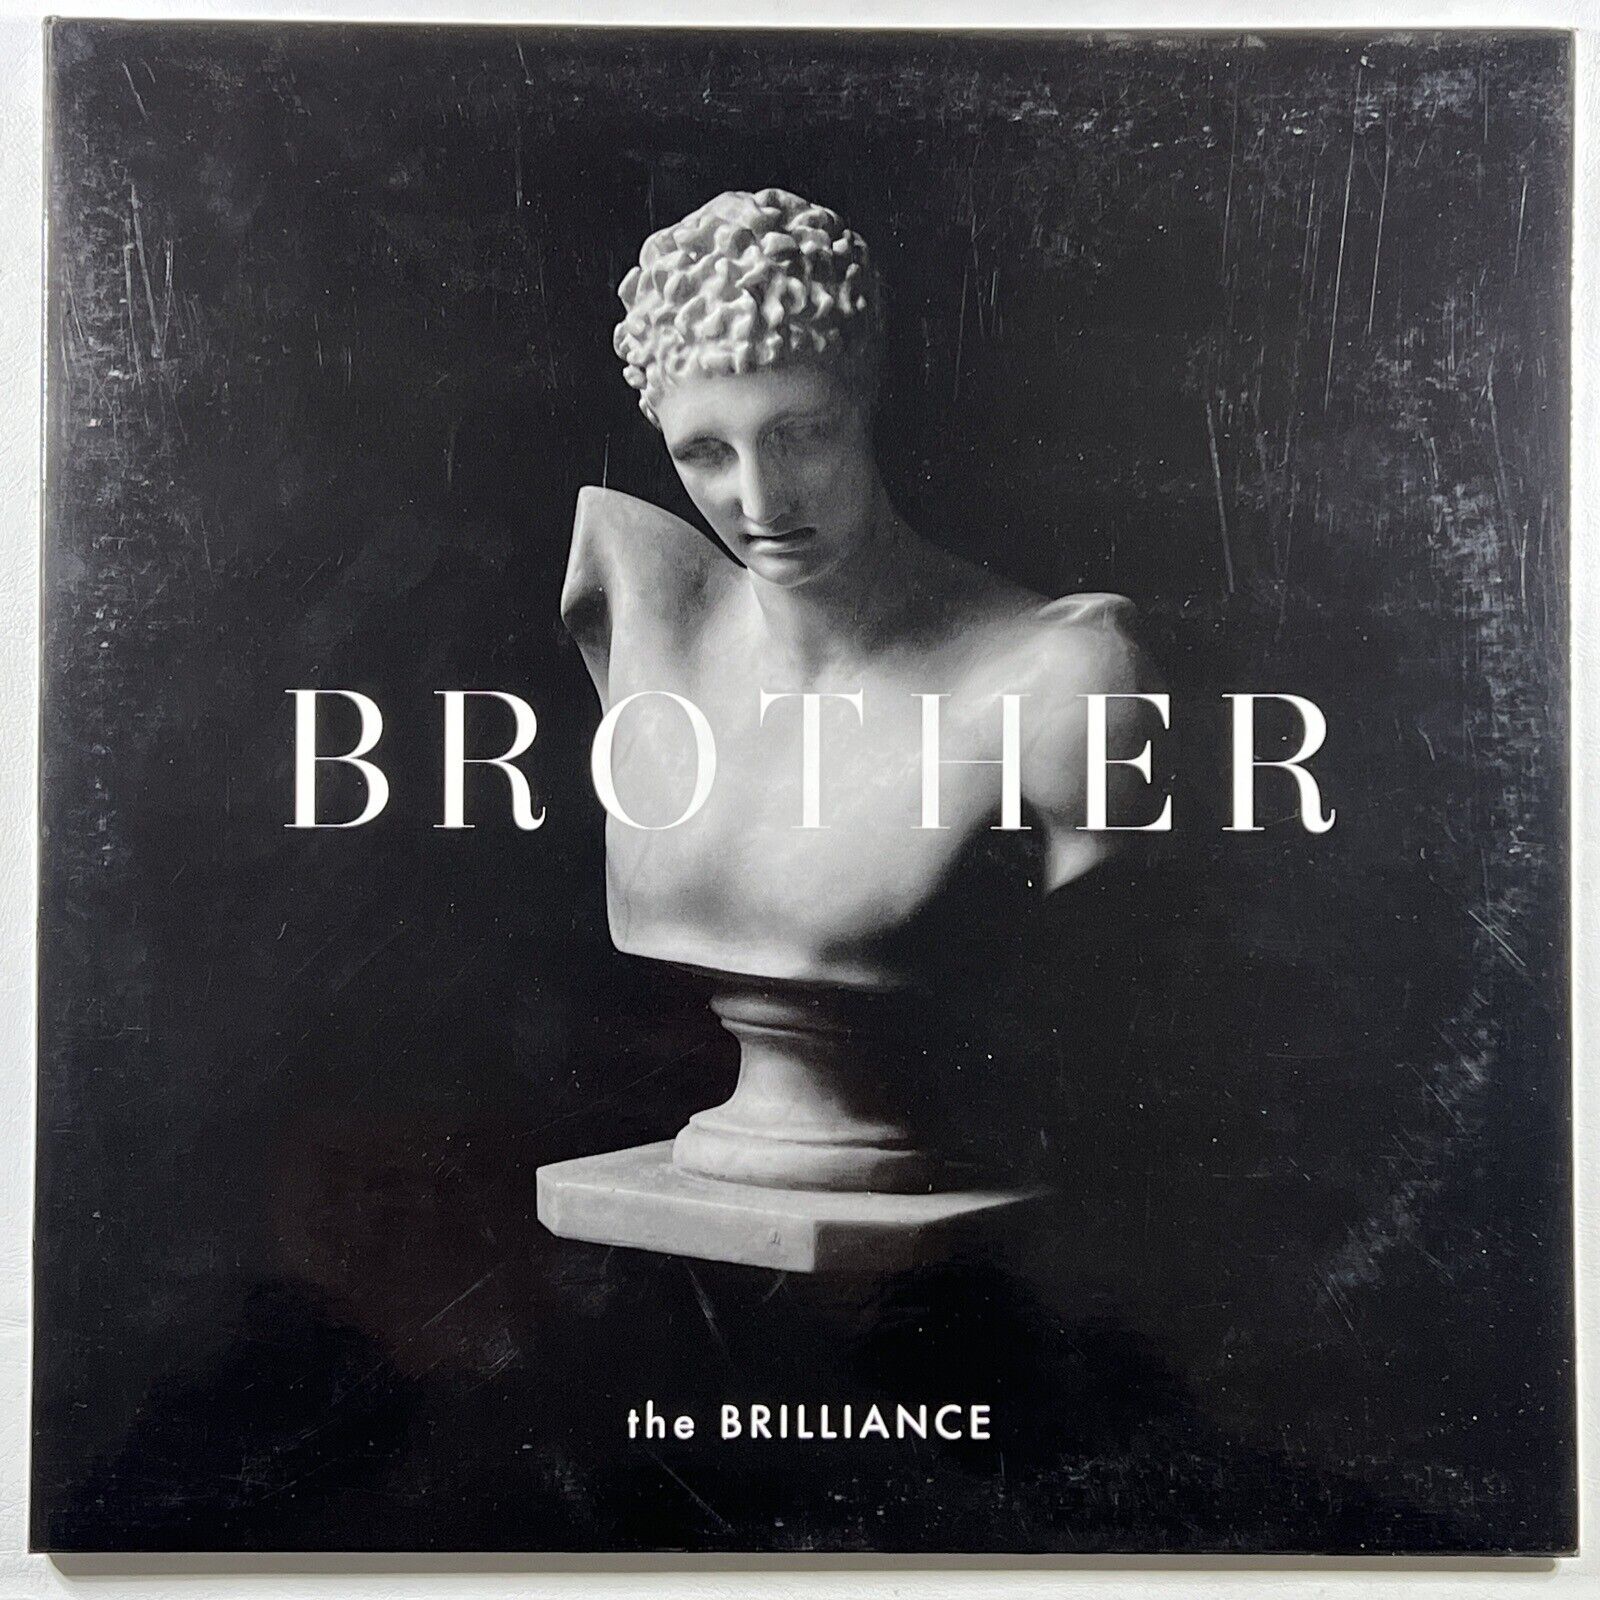 The Brilliance “Brother” LP/Integrity Music 64230 (EX) Gatefold 2015